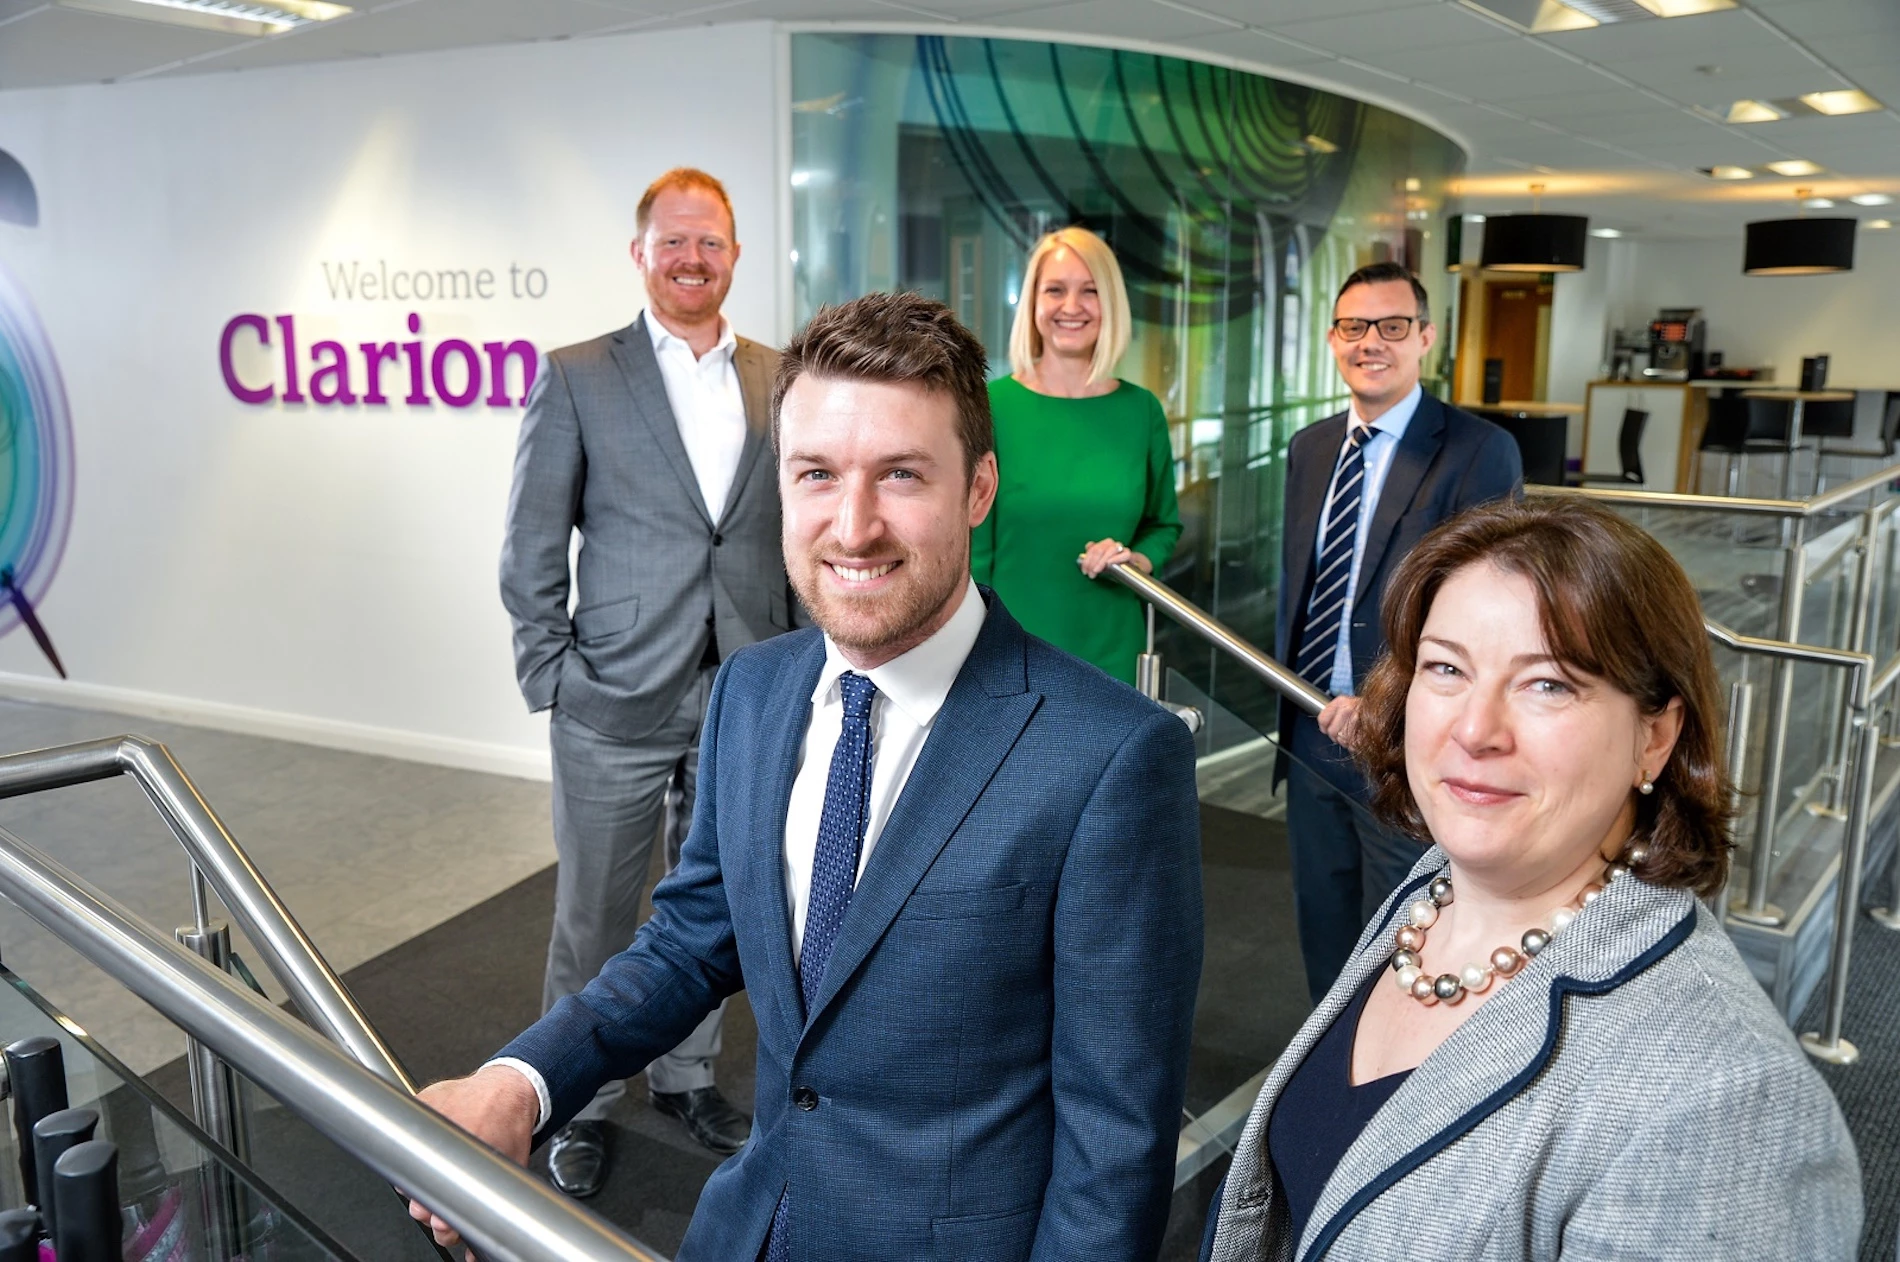 Marcus Watson (front left) and Eve Gregory (front right) with (L to R) Martin Grange, Lindsay Texel and Ben Lamb of Clarion’s property team